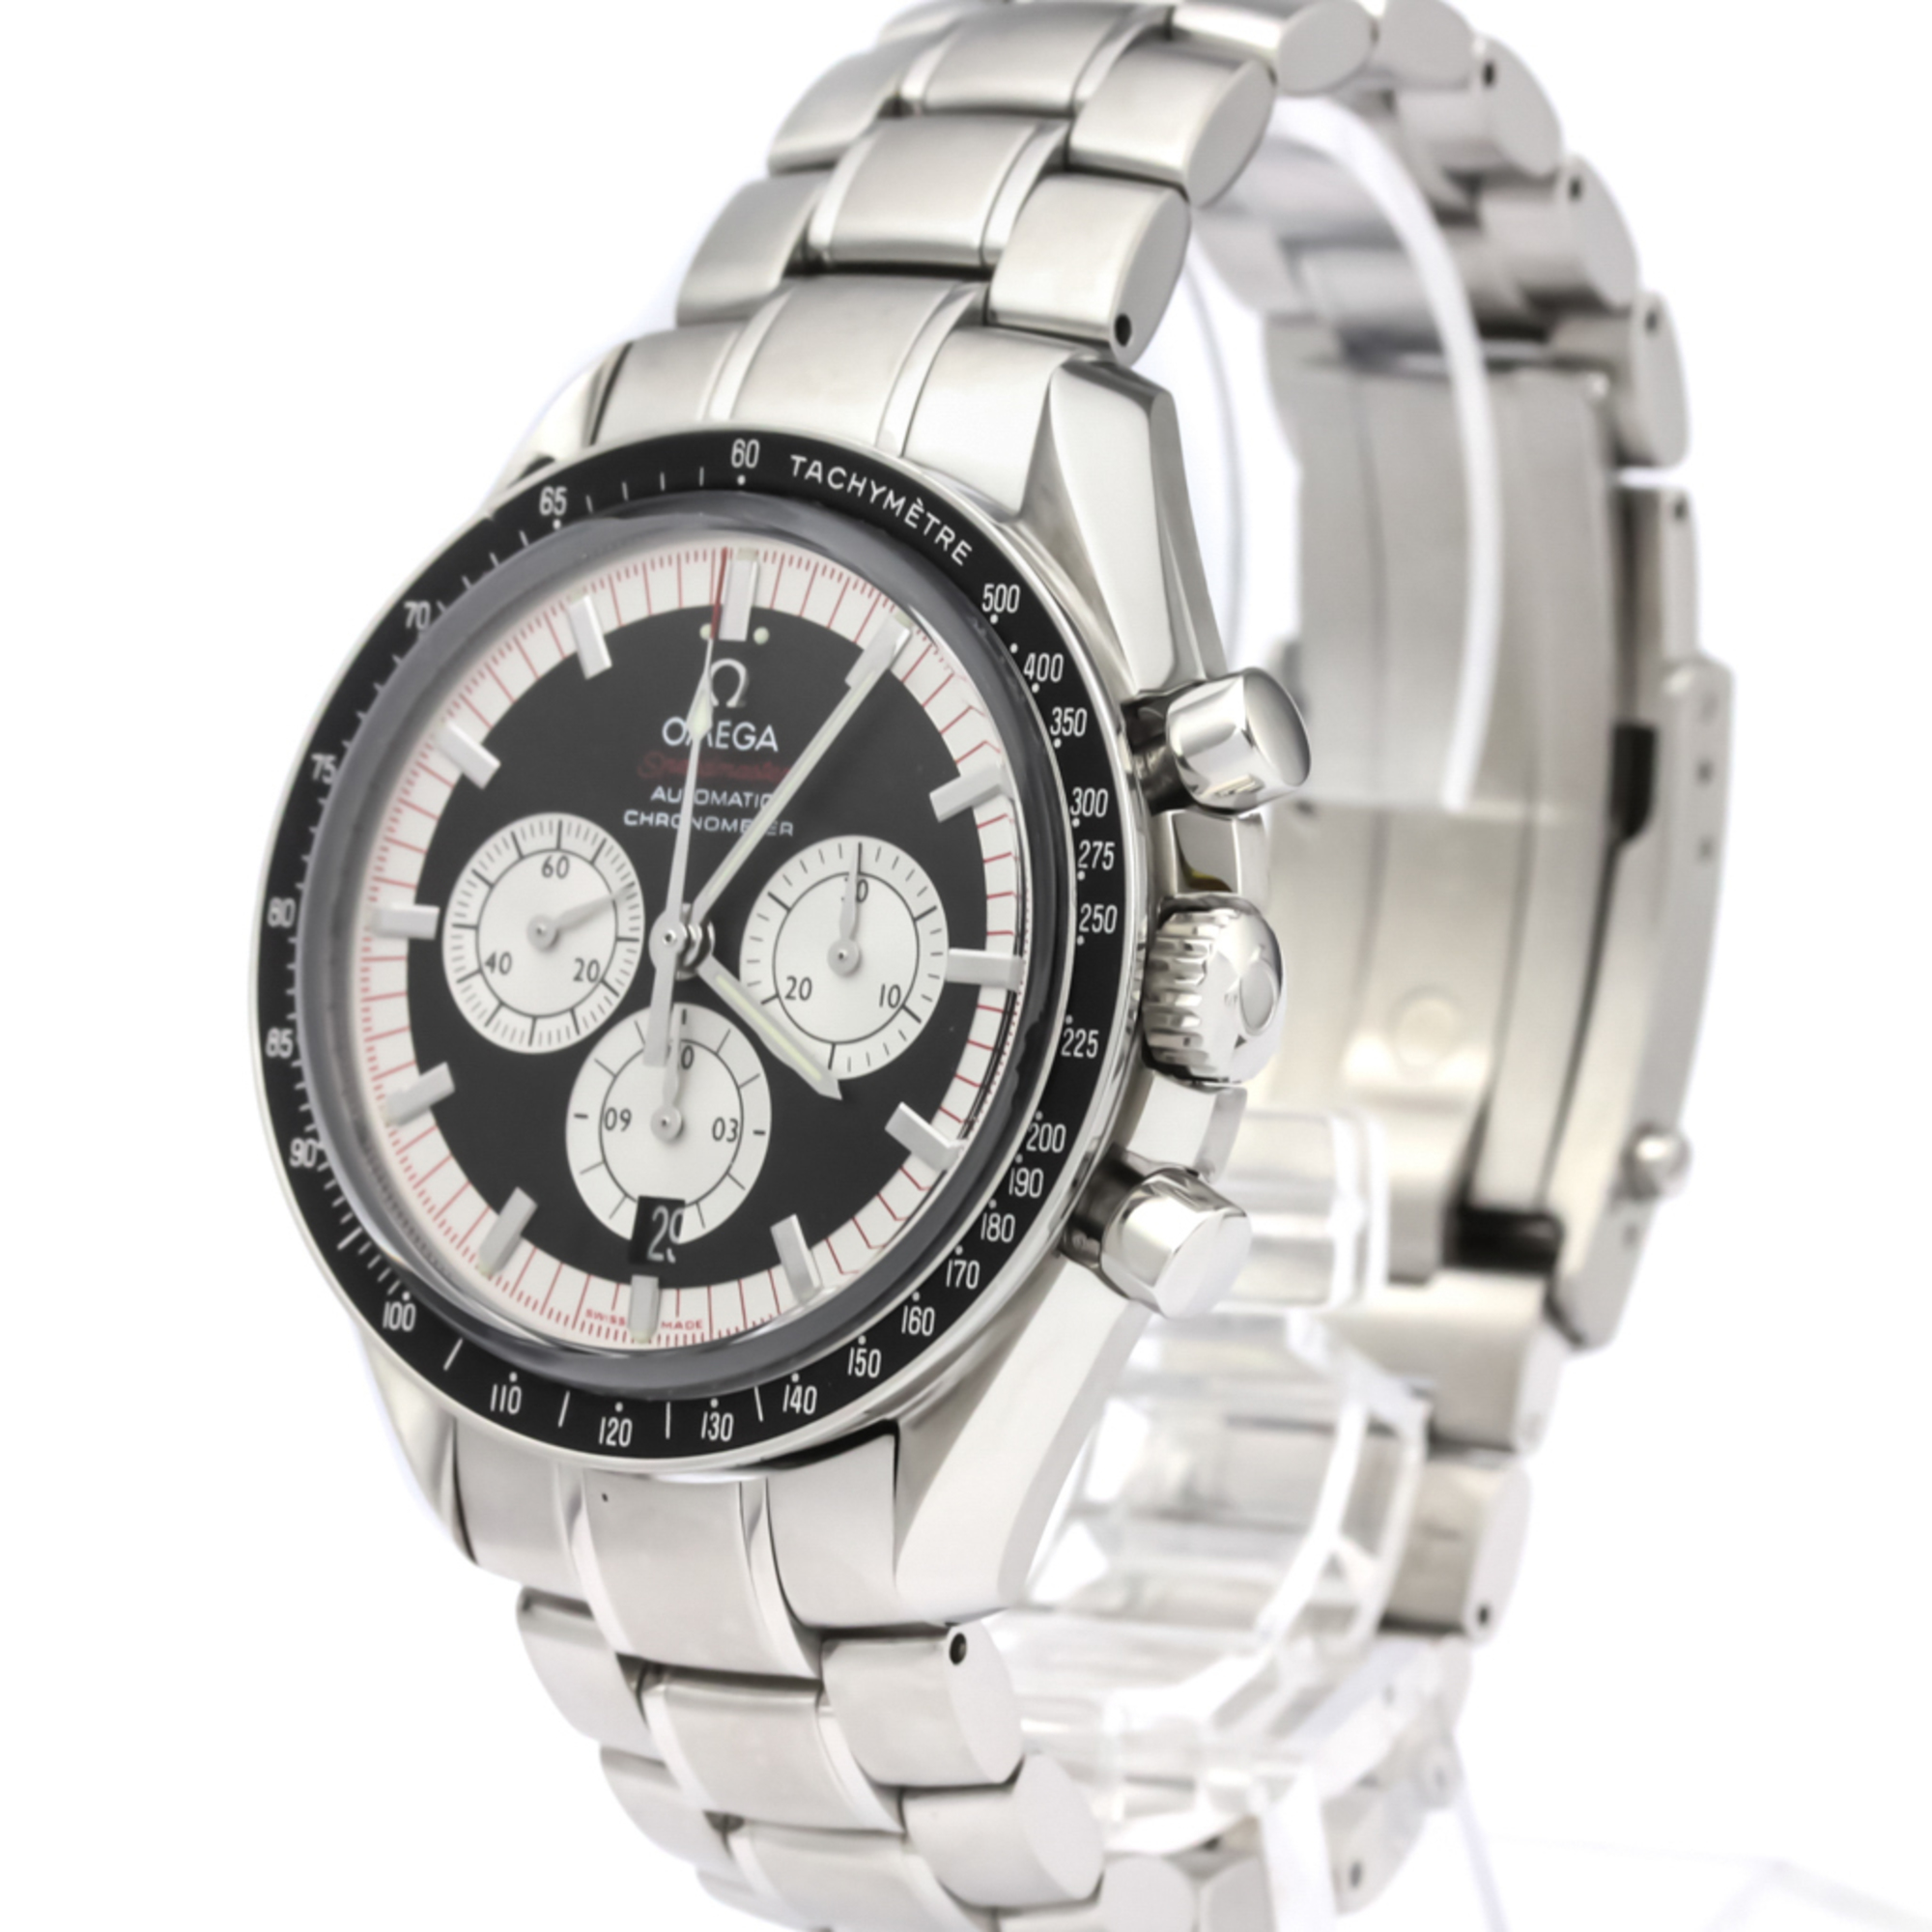 Omega Speedmaster Automatic Stainless Steel Men's Sports Watch 3507.51